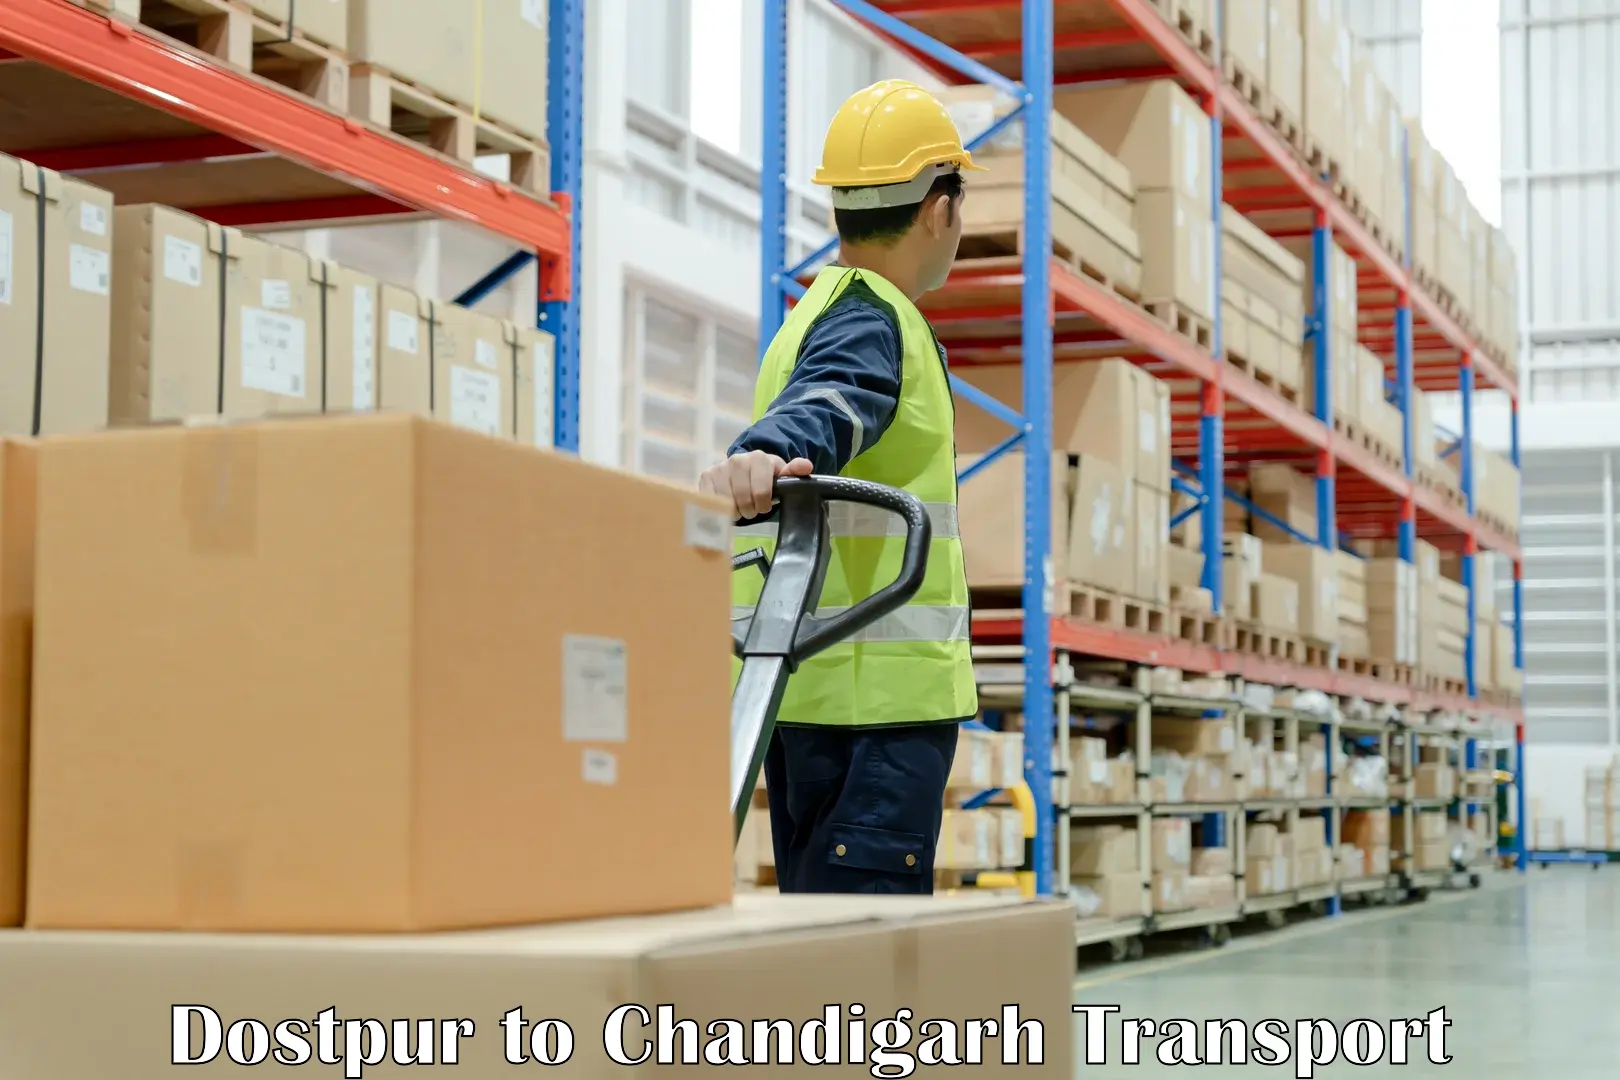 Express transport services Dostpur to Chandigarh